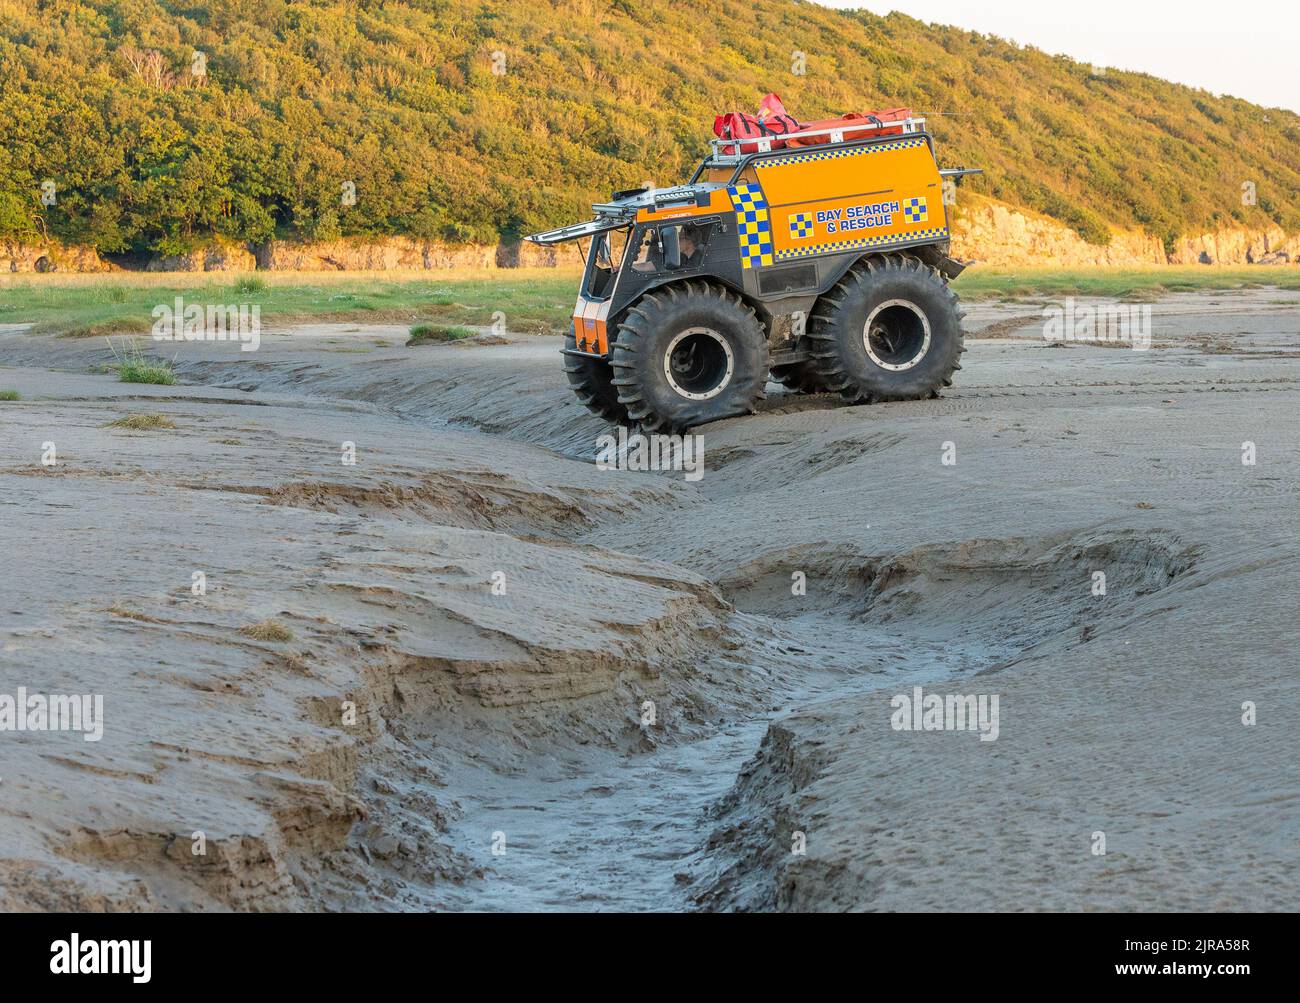 A Bay Search and Rescue Sherp All Terrain Vehicle at White Creek, Arnside, Milnthorpe, Cumbria, UK Stock Photo